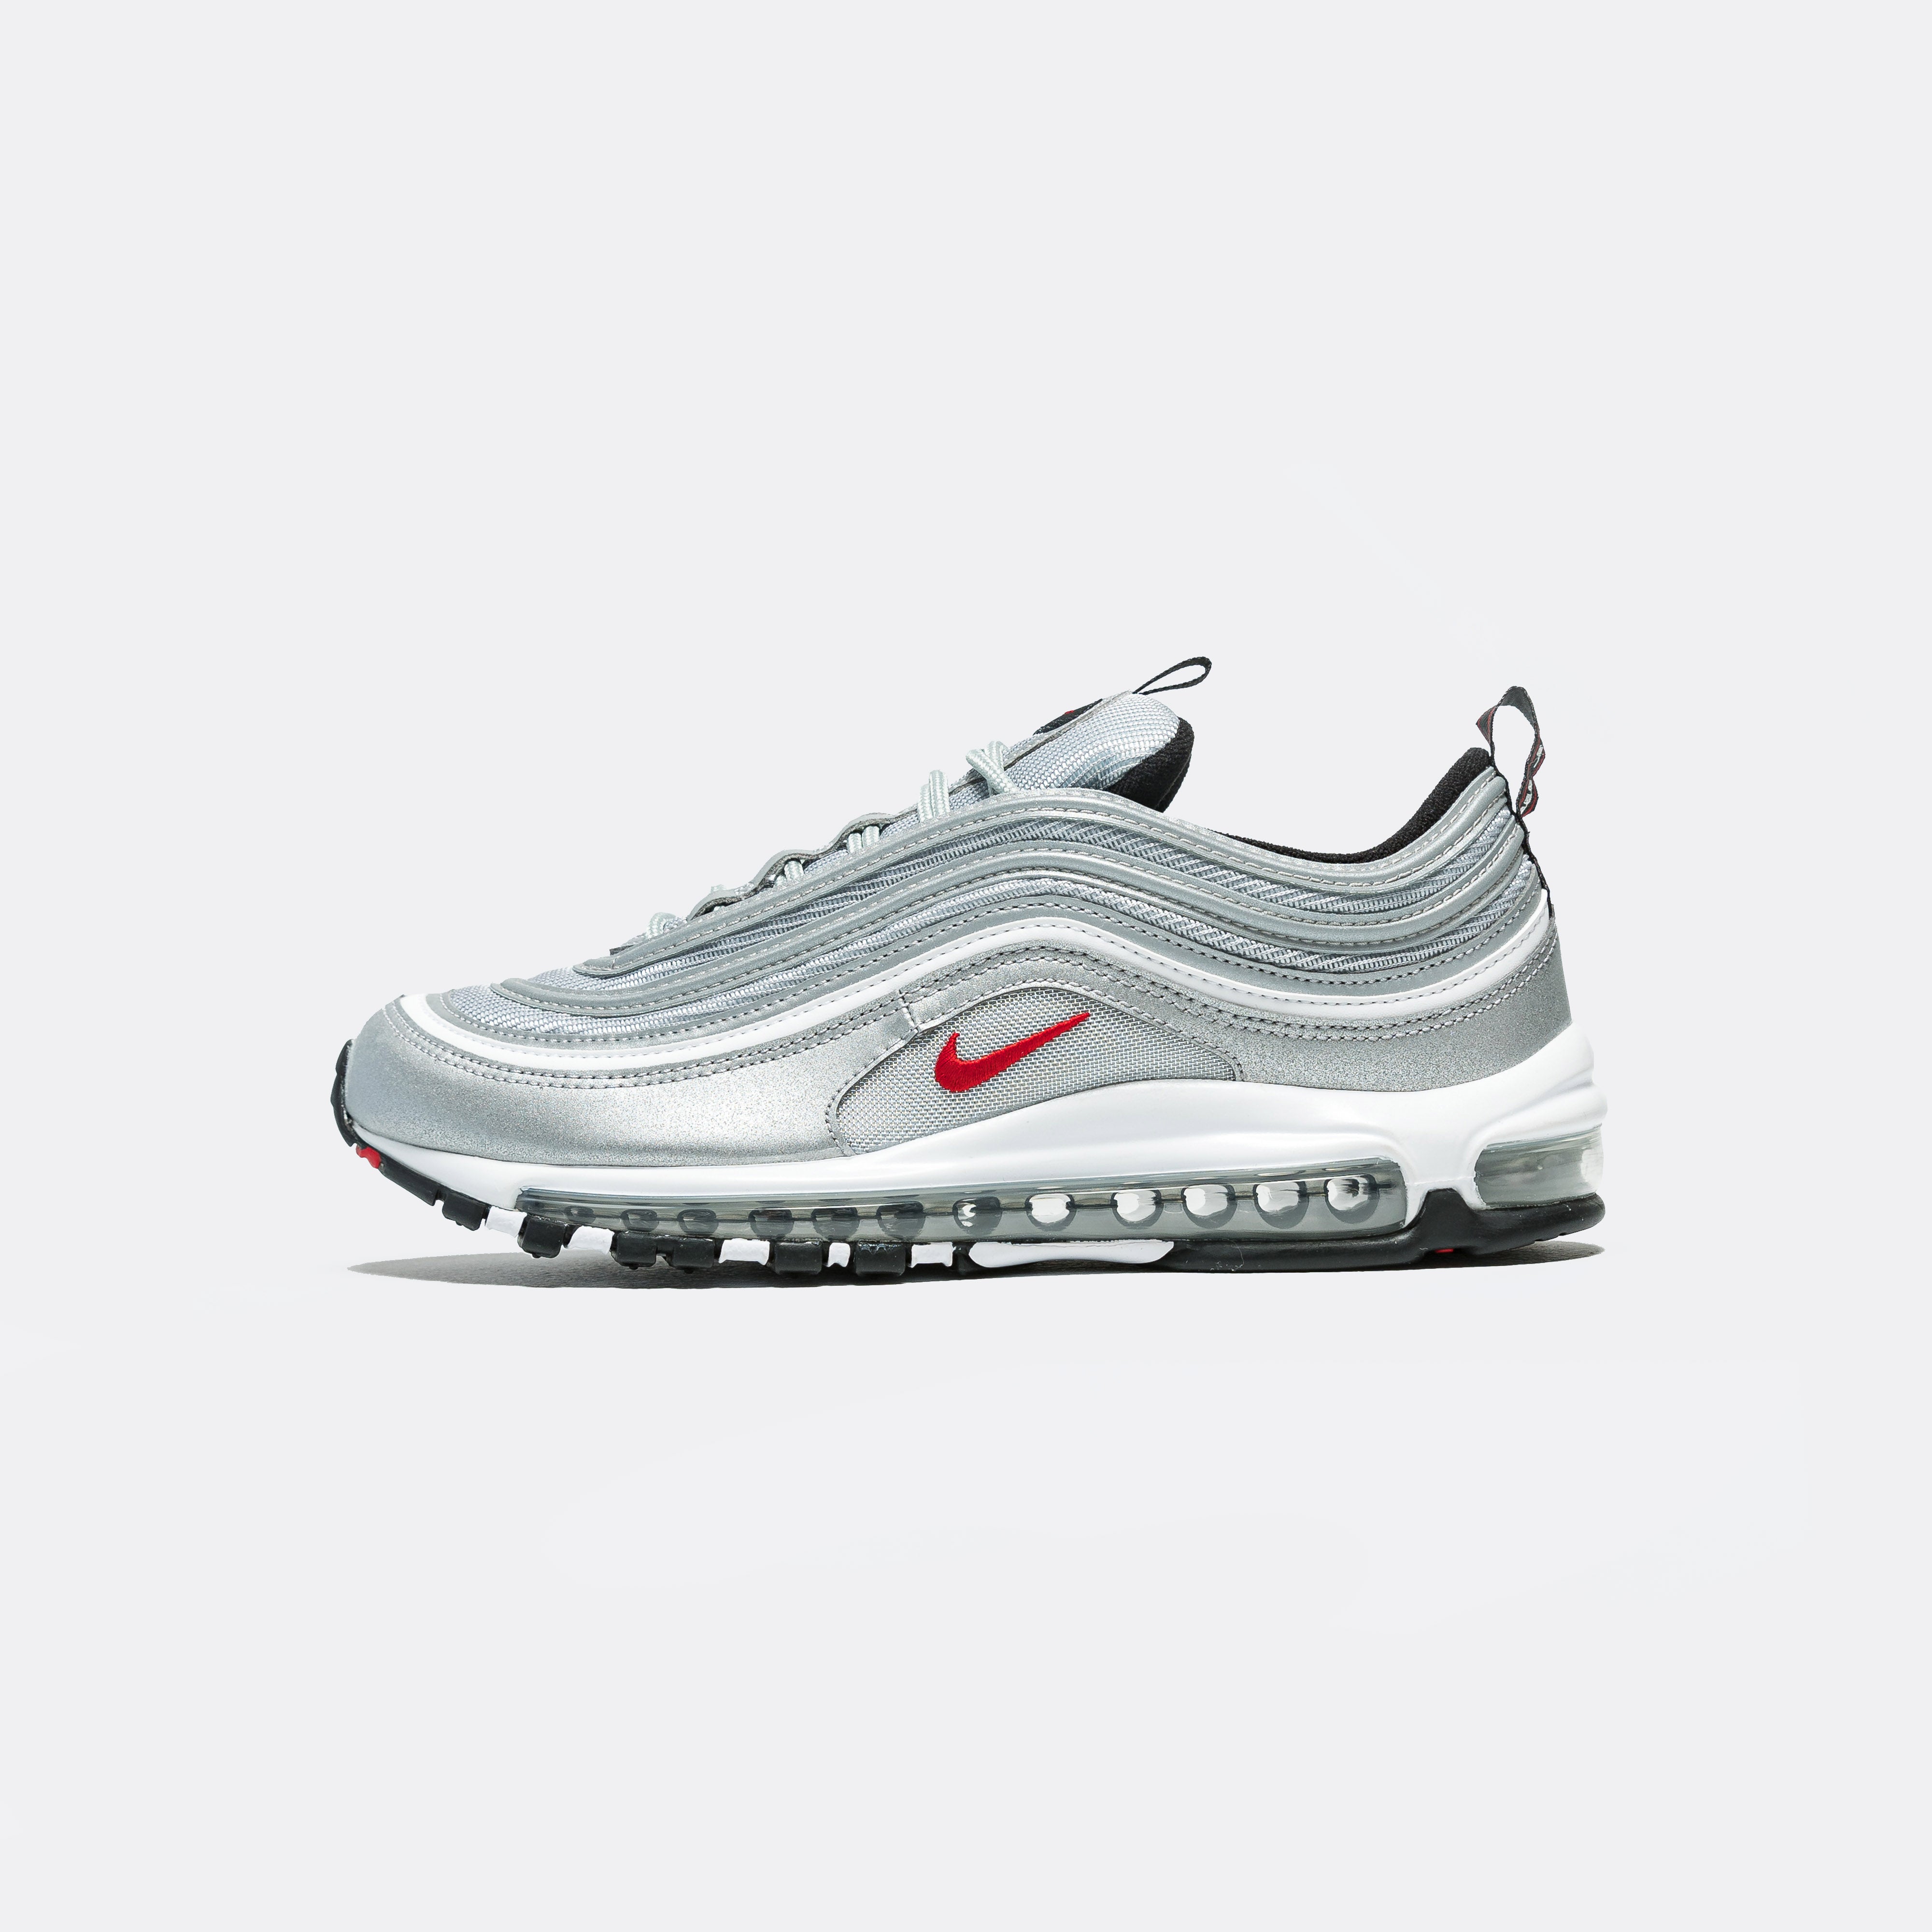 travl appel ilt Nike Air Max 97 OG 'Silver Bullet' - Metallic Silver | Up There | UP THERE